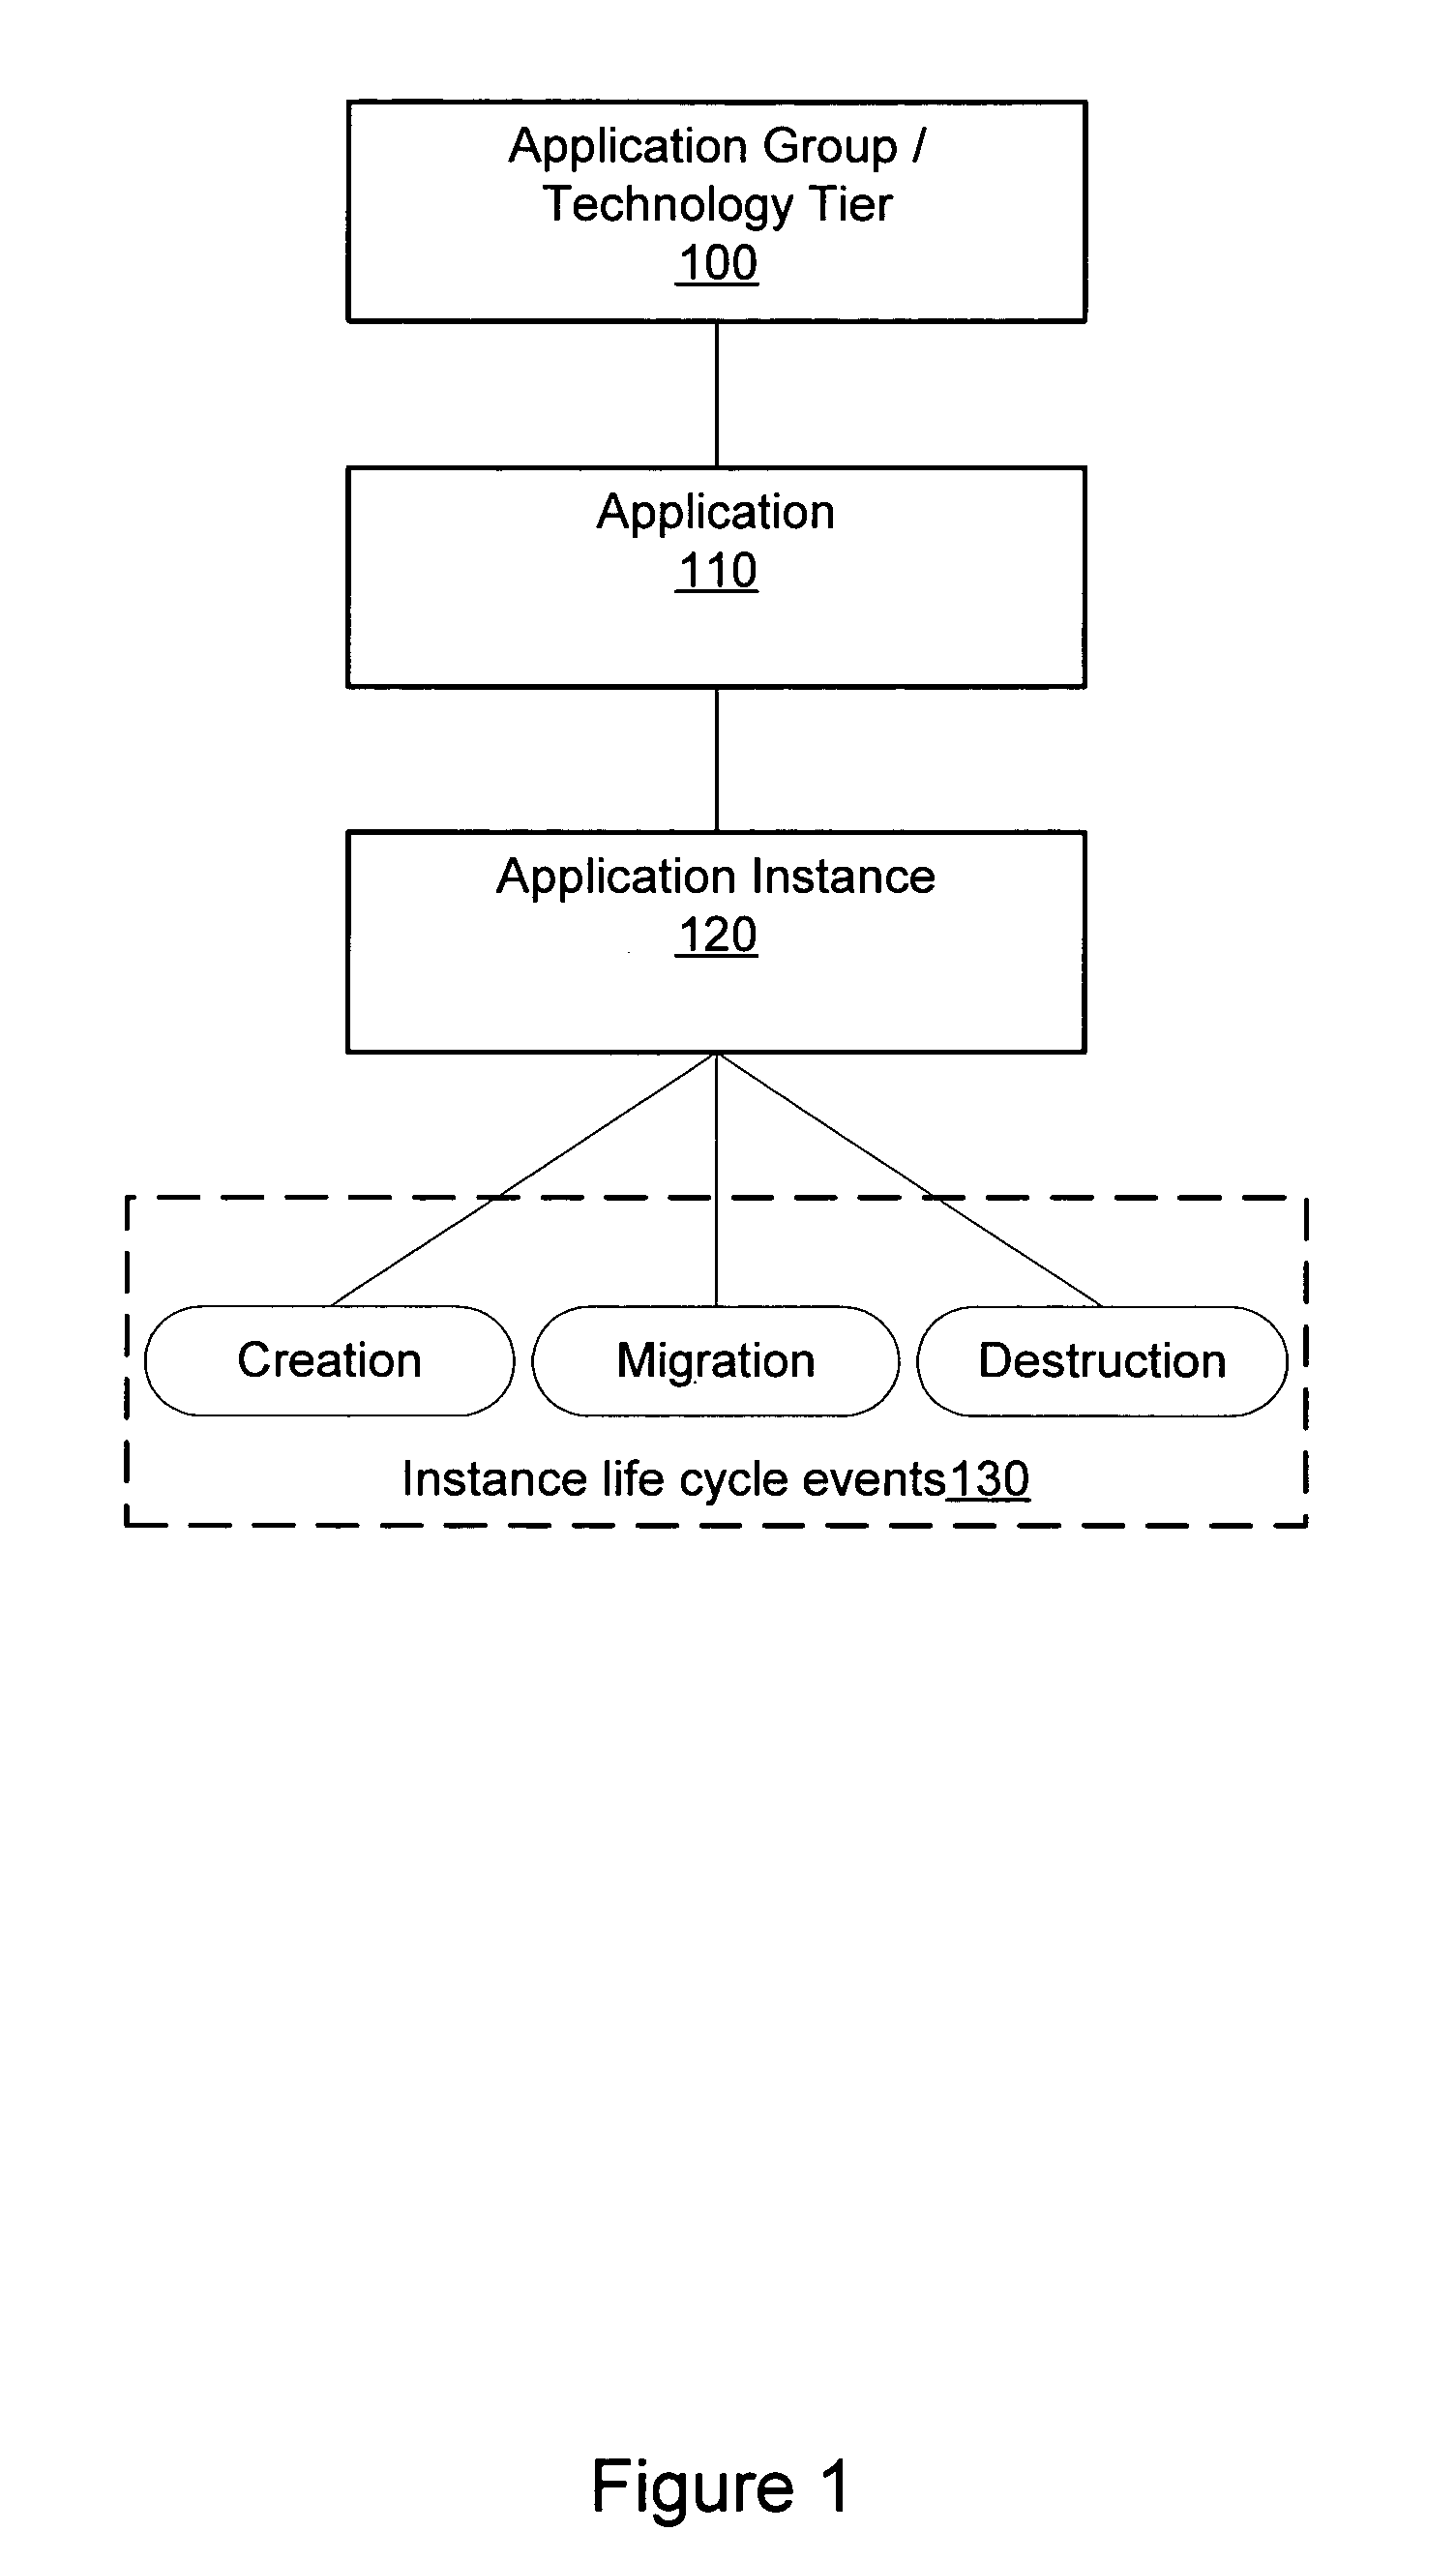 Correlation of application instance life cycle events in performance monitoring